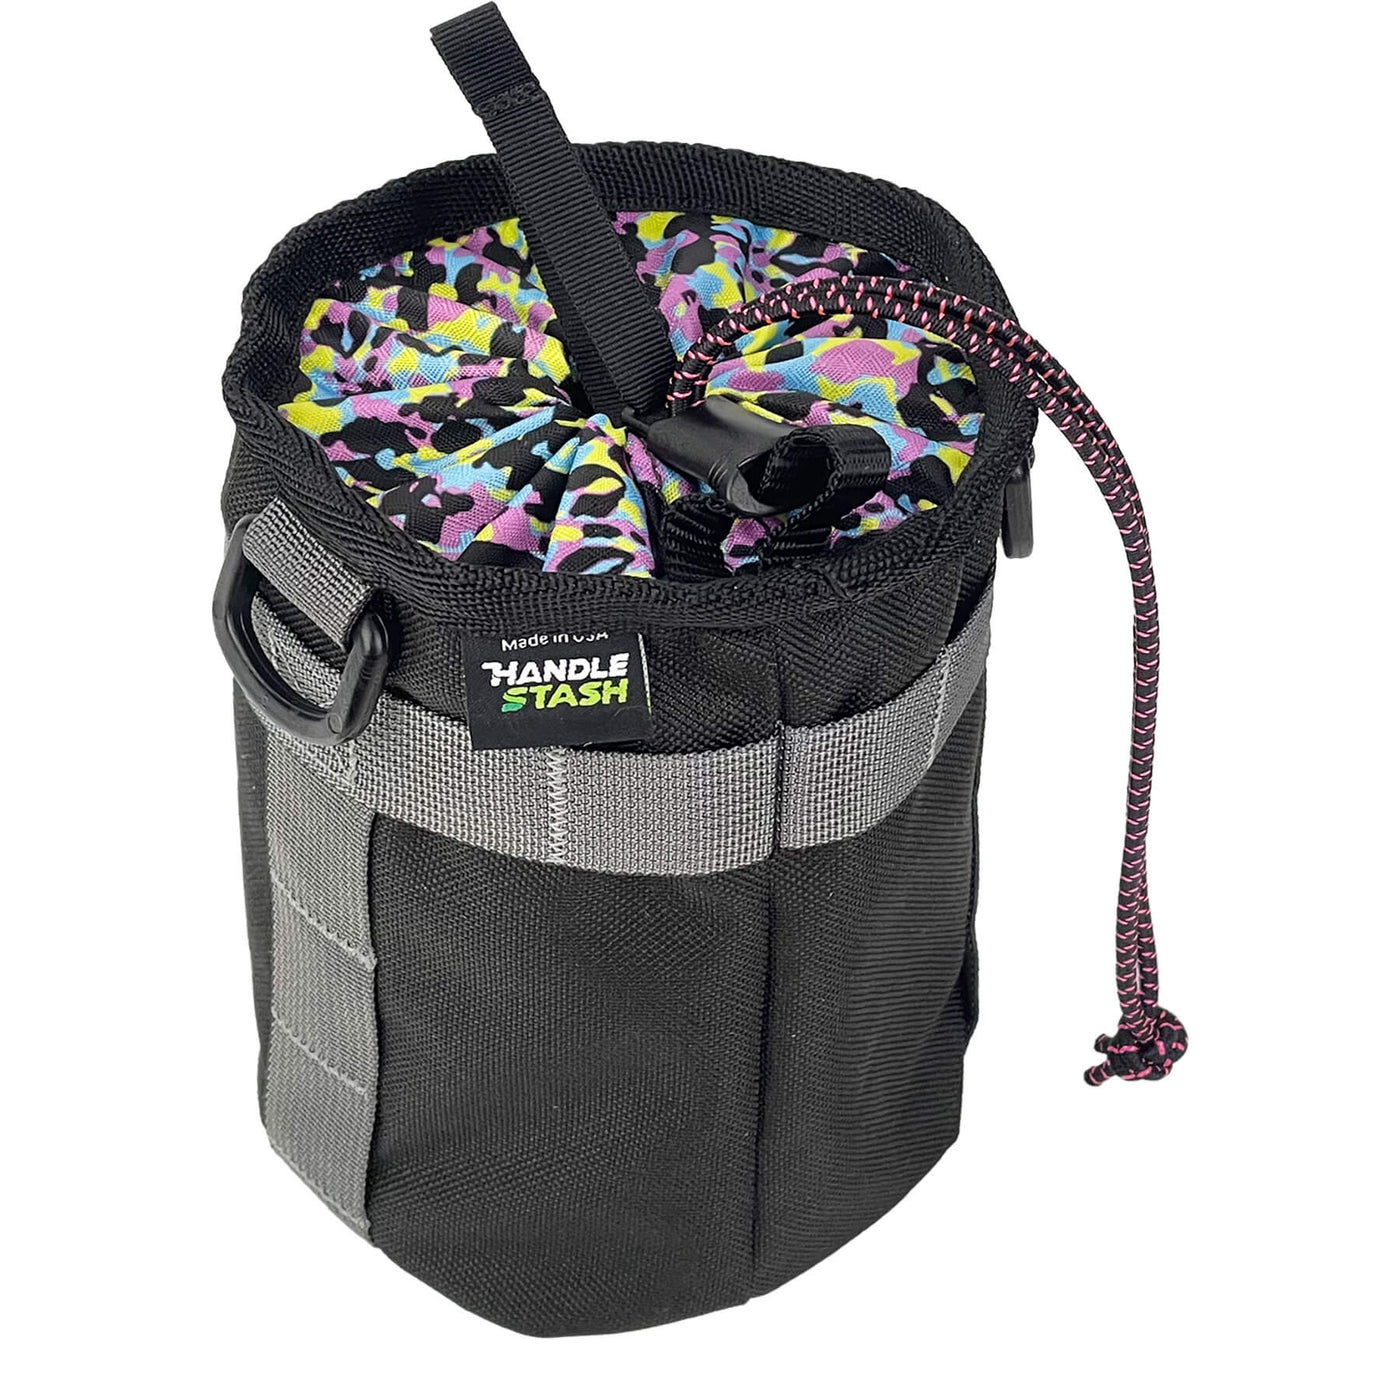 Black stem bag with neon camo liner cinched closed. 